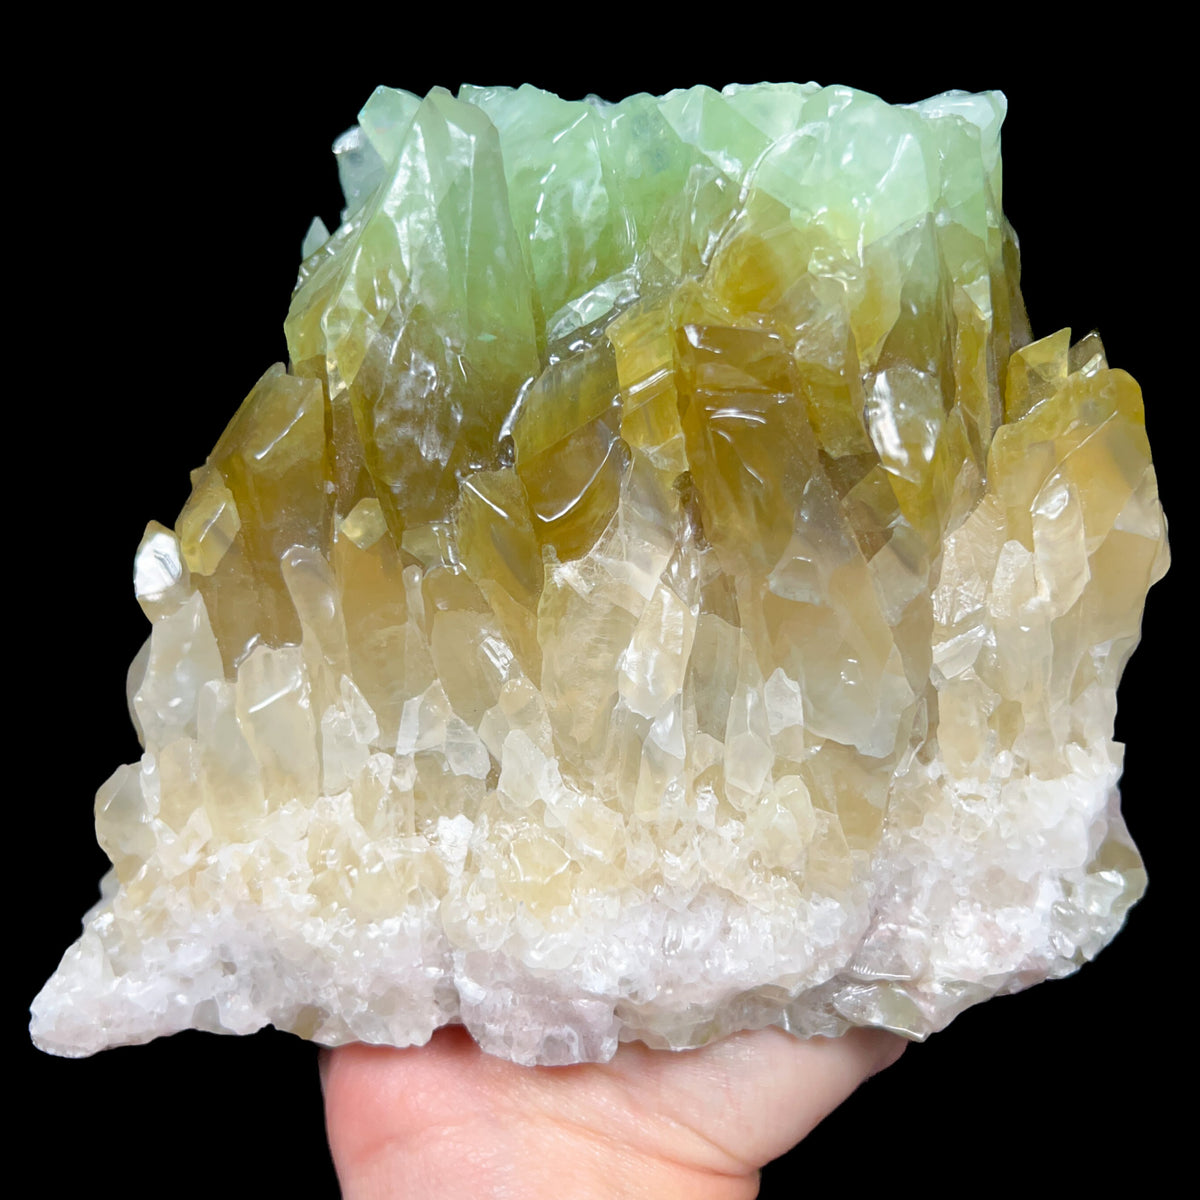 Large Green Calcite Crystal Specimen from Mexico